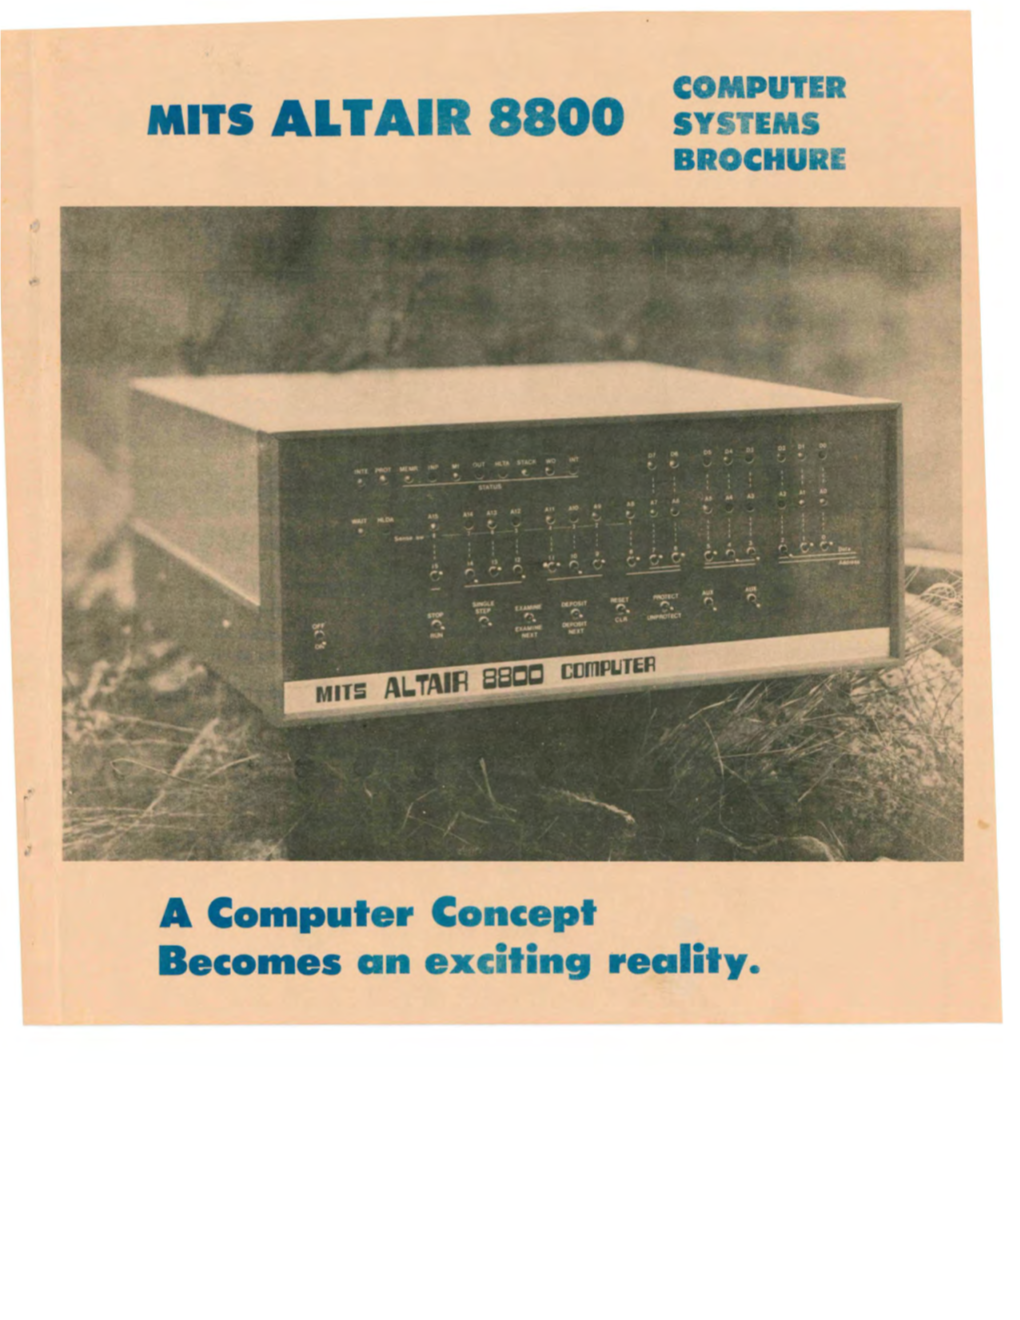 MITS Altair 8800 Computer Systems Brochure